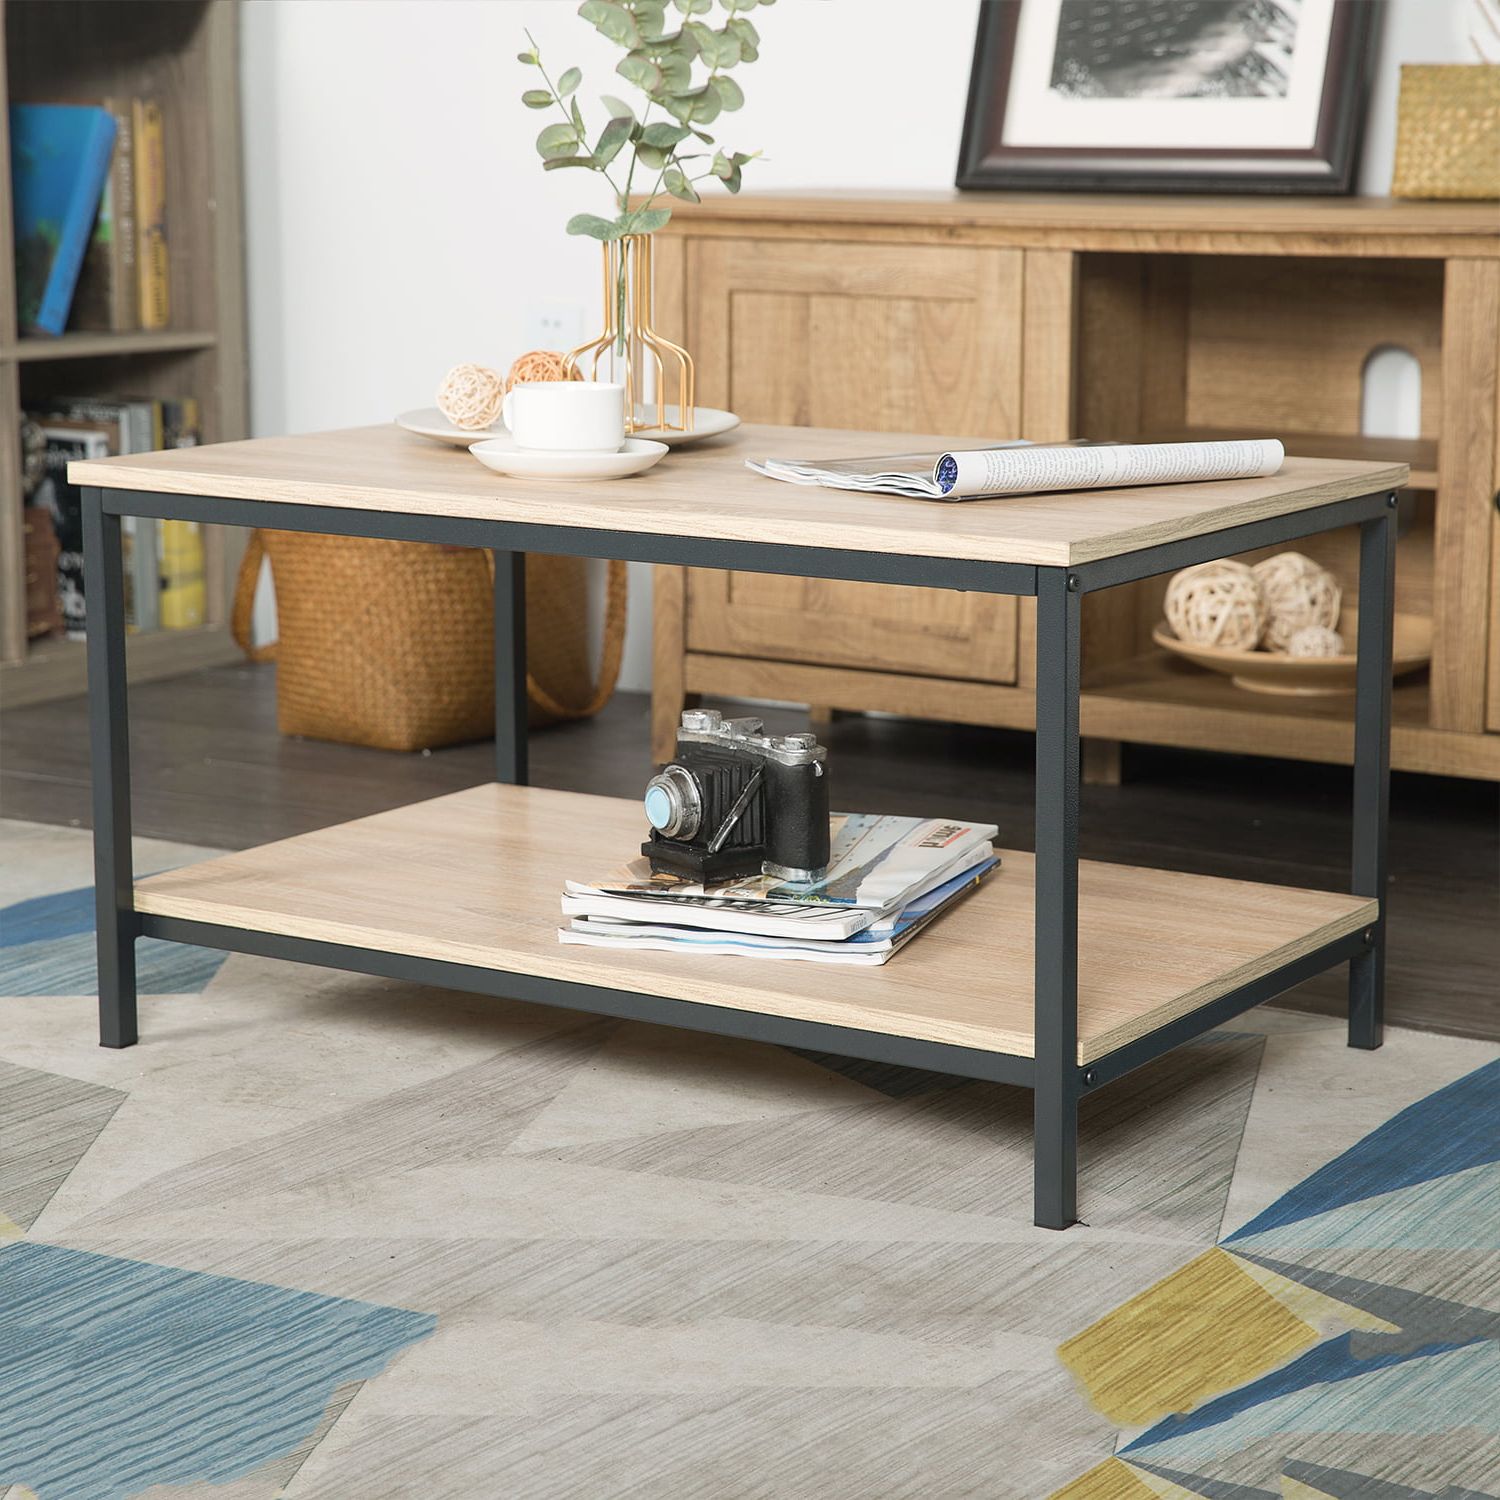 Finefind Modern Industrial Metal Rectangular Coffee Table With Storage In Metal 1 Shelf Coffee Tables (View 10 of 20)